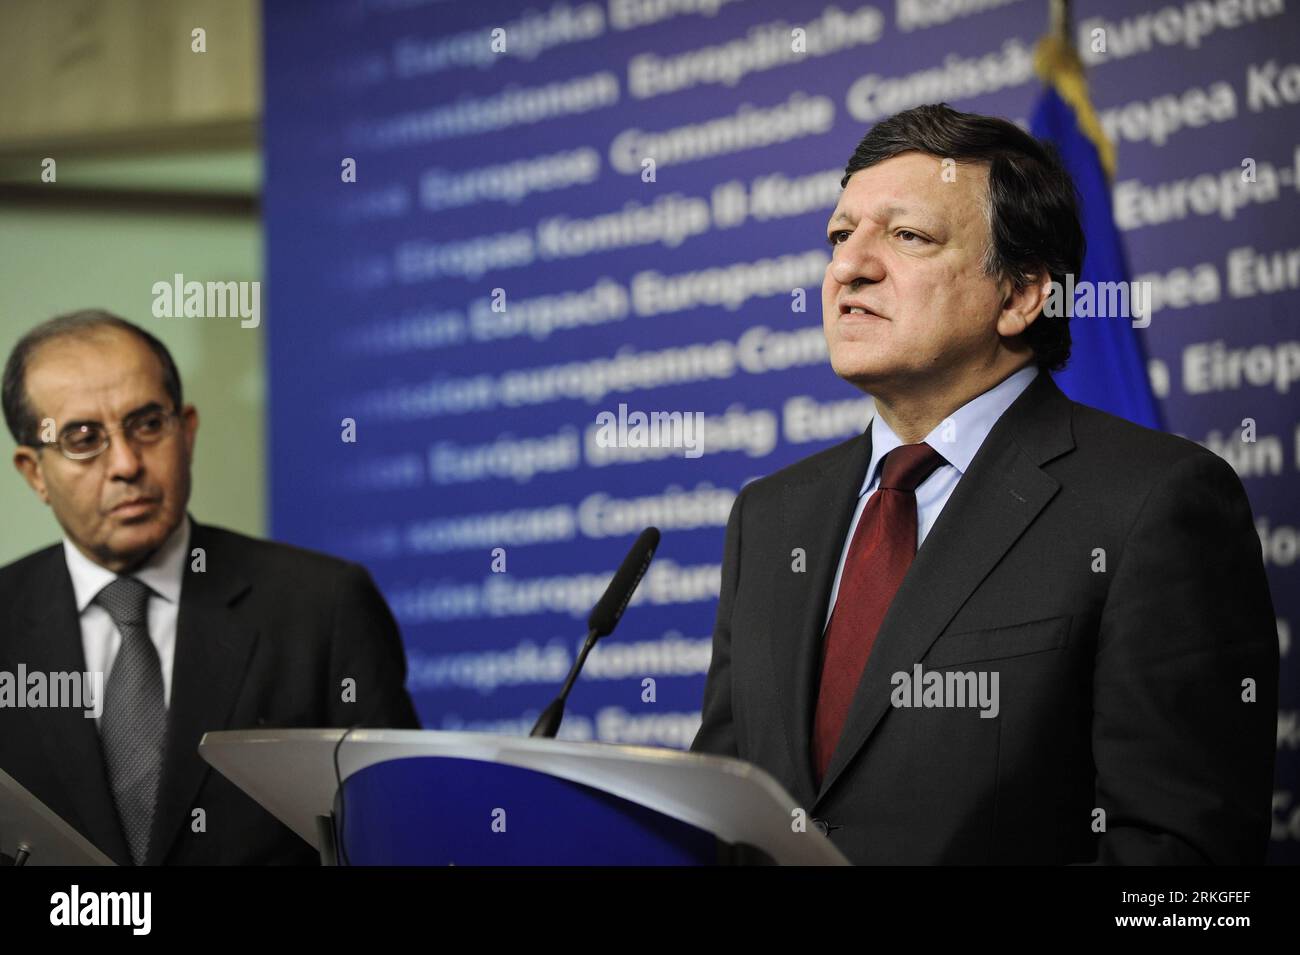 Bildnummer: 55590610  Datum: 13.07.2011  Copyright: imago/Xinhua (110713) -- BRUSSELS, July 13, 2011 (Xinhua) -- European Commission President Jose Manuel Barroso(R) speaks as Chairman of the Executive Board of the National Transitional Council of Libya Mahmoud Jibril stand beside during a press conference following a working session at EU headquarters in Brussels, July 13, 2011.(Xinhua/Yu Yang)(yy) (2)BELGIUM-BRUSSELS-EU-LIBYA-PRESS CONFERENCE PUBLICATIONxNOTxINxCHN People Politik xjh x0x 2011 quer premiumd     Bildnummer 55590610 Date 13 07 2011 Copyright Imago XINHUA  Brussels July 13 2011 Stock Photo